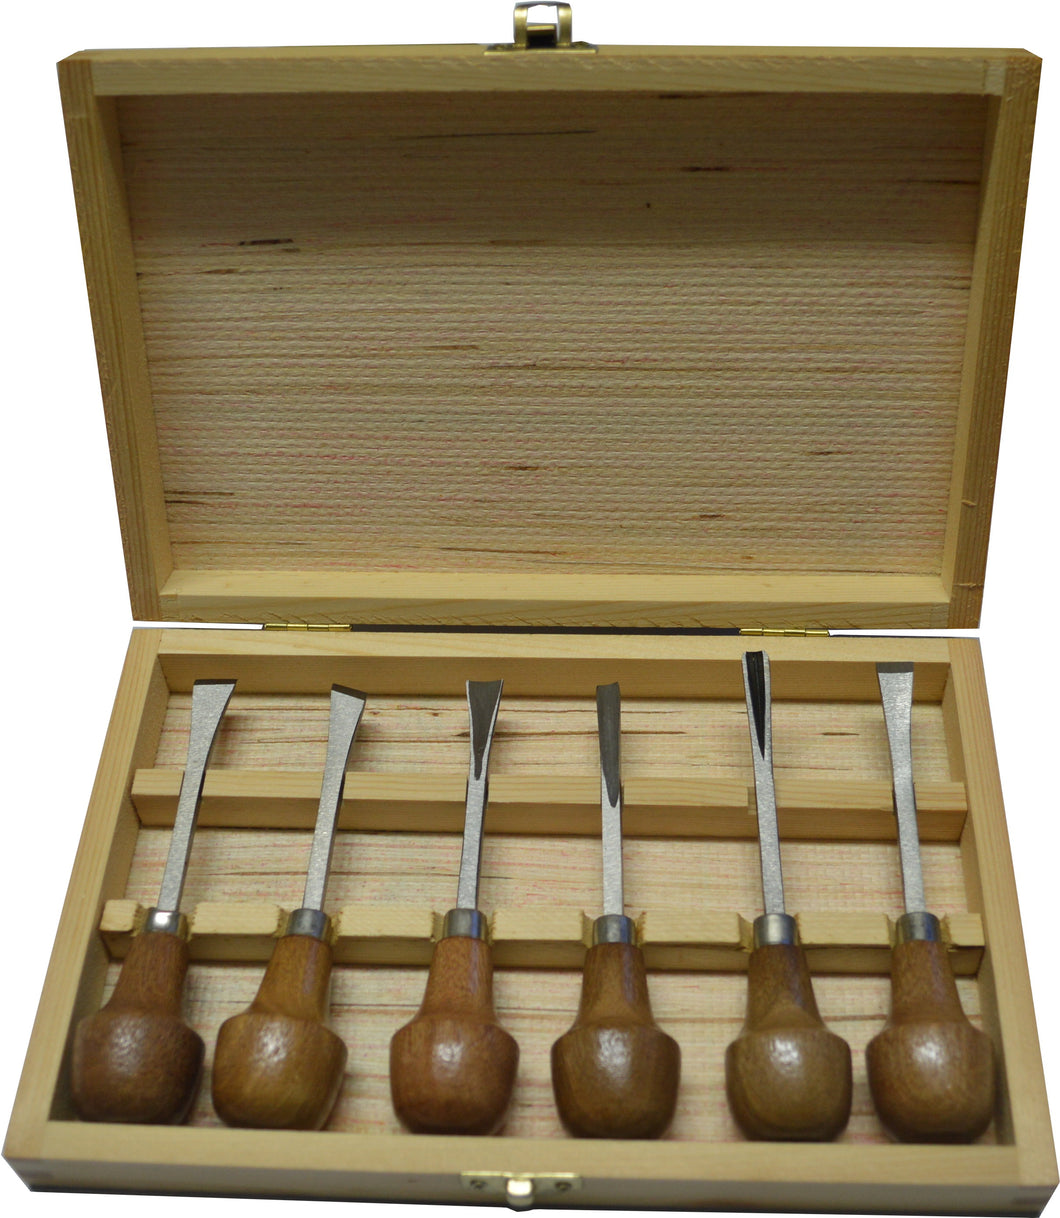 Carving Chisel Set with Wood Handles 6-pce